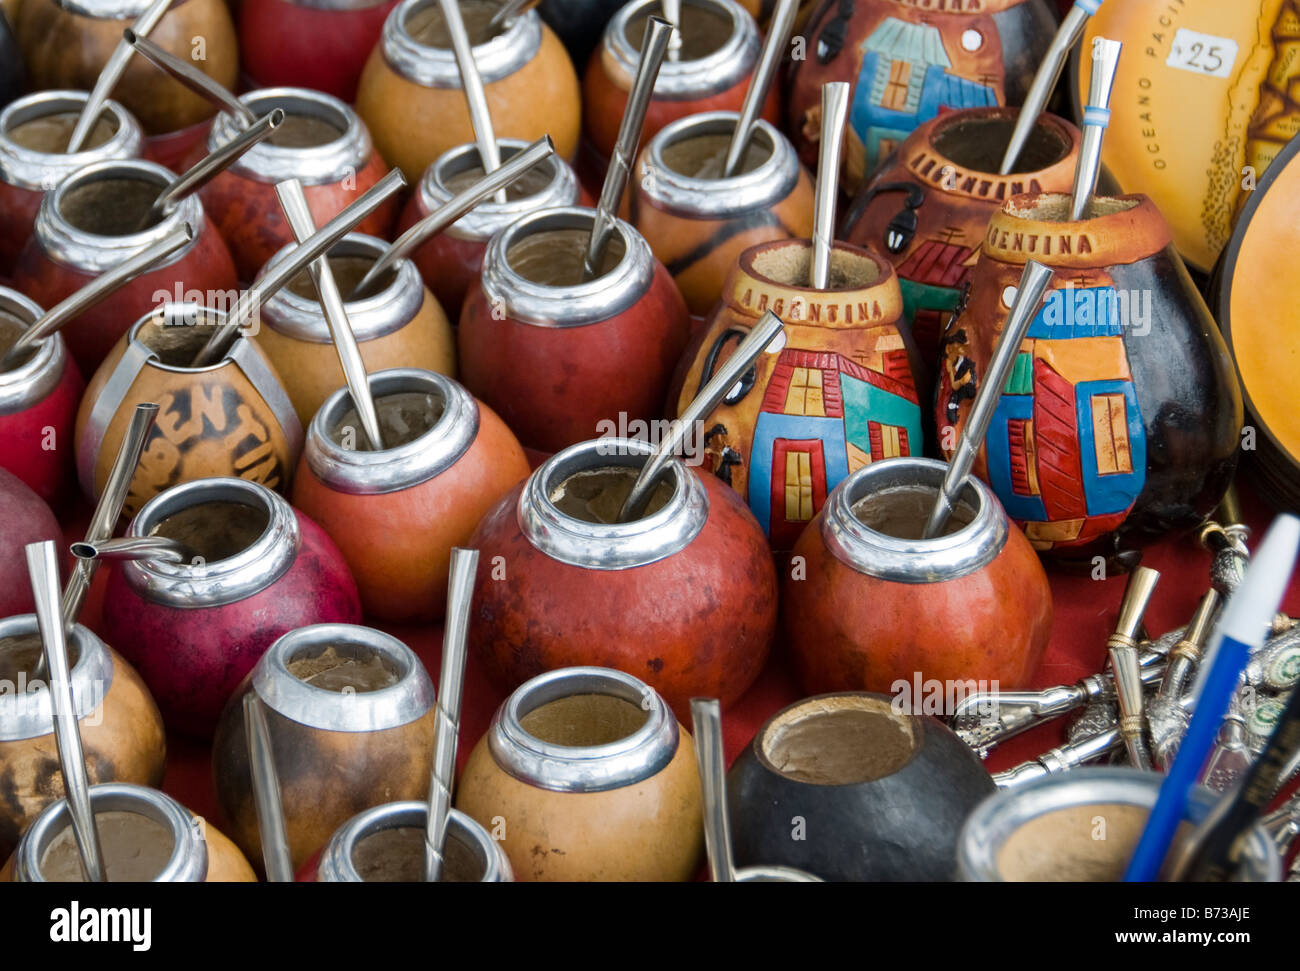 Mate cups for sale in Buenos Aires Argentina Stock Photo